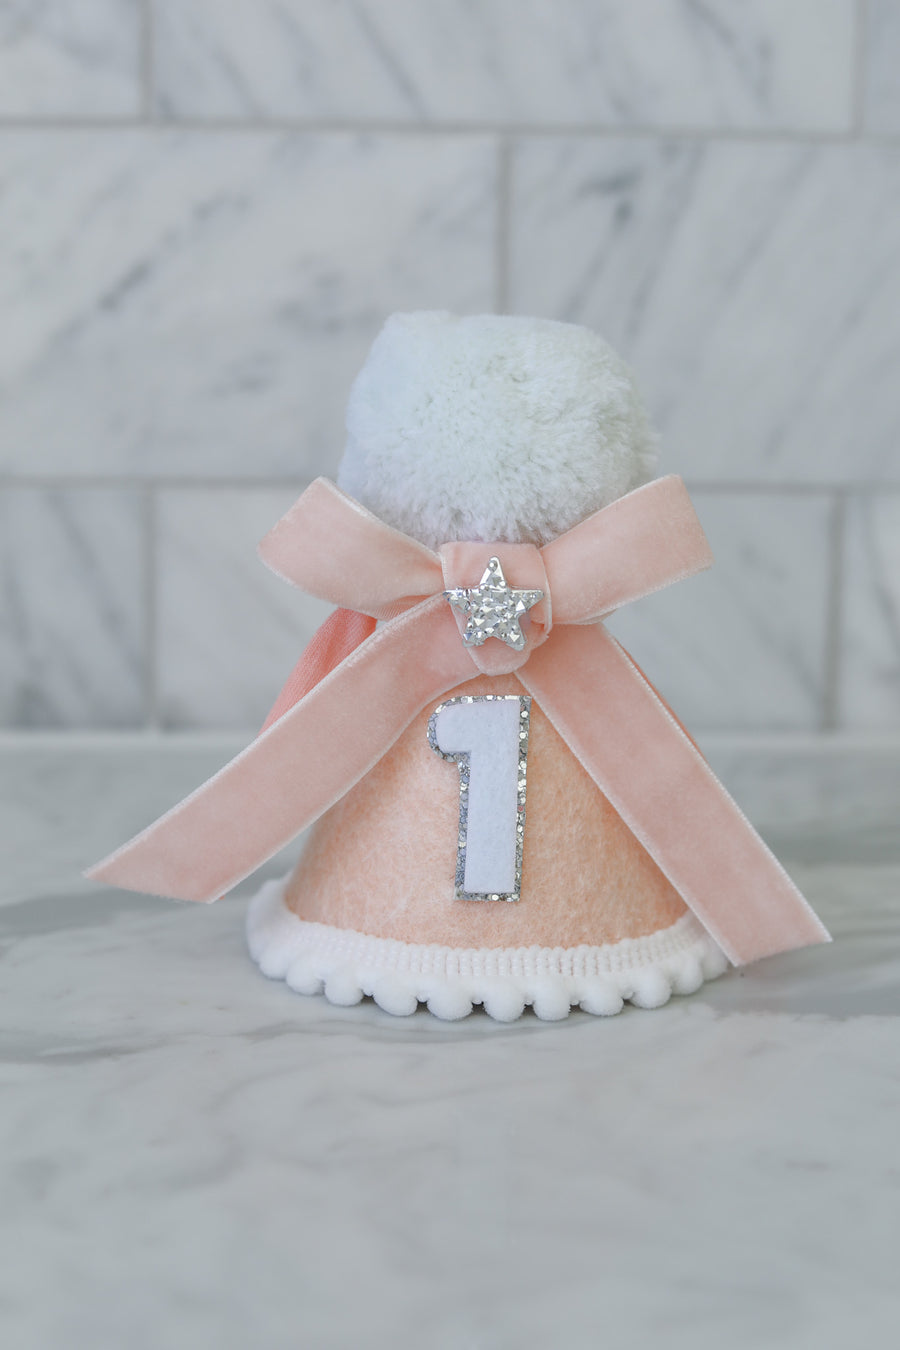 Soft Peach and Silver Bow Birthday Party Hat